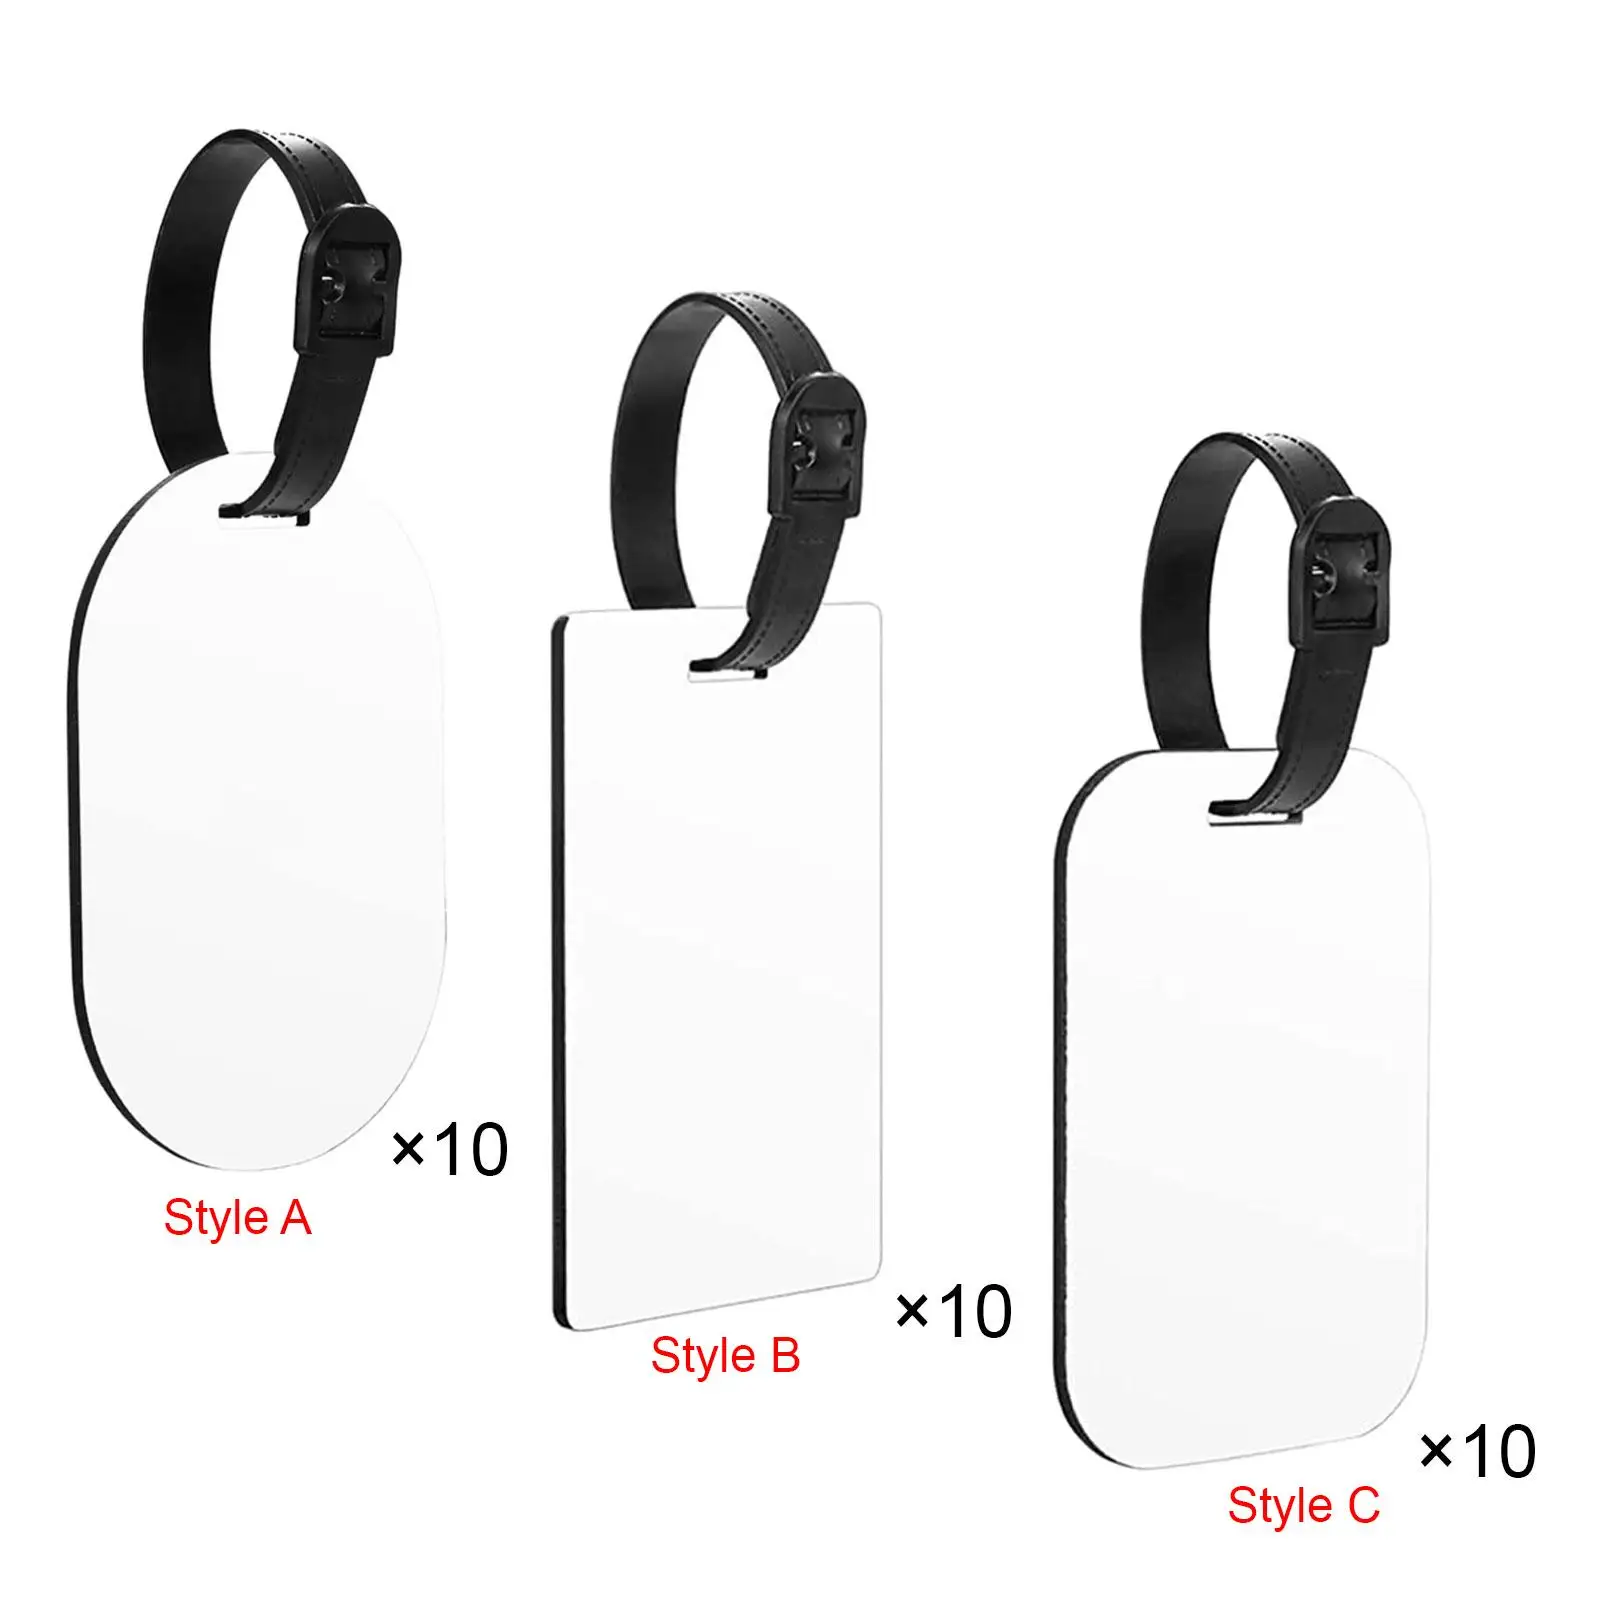 10x Sublimation Blank Luggage Tags Keychain with Straps Luggage Tags for DIY Printing Identification Labels Car Seat